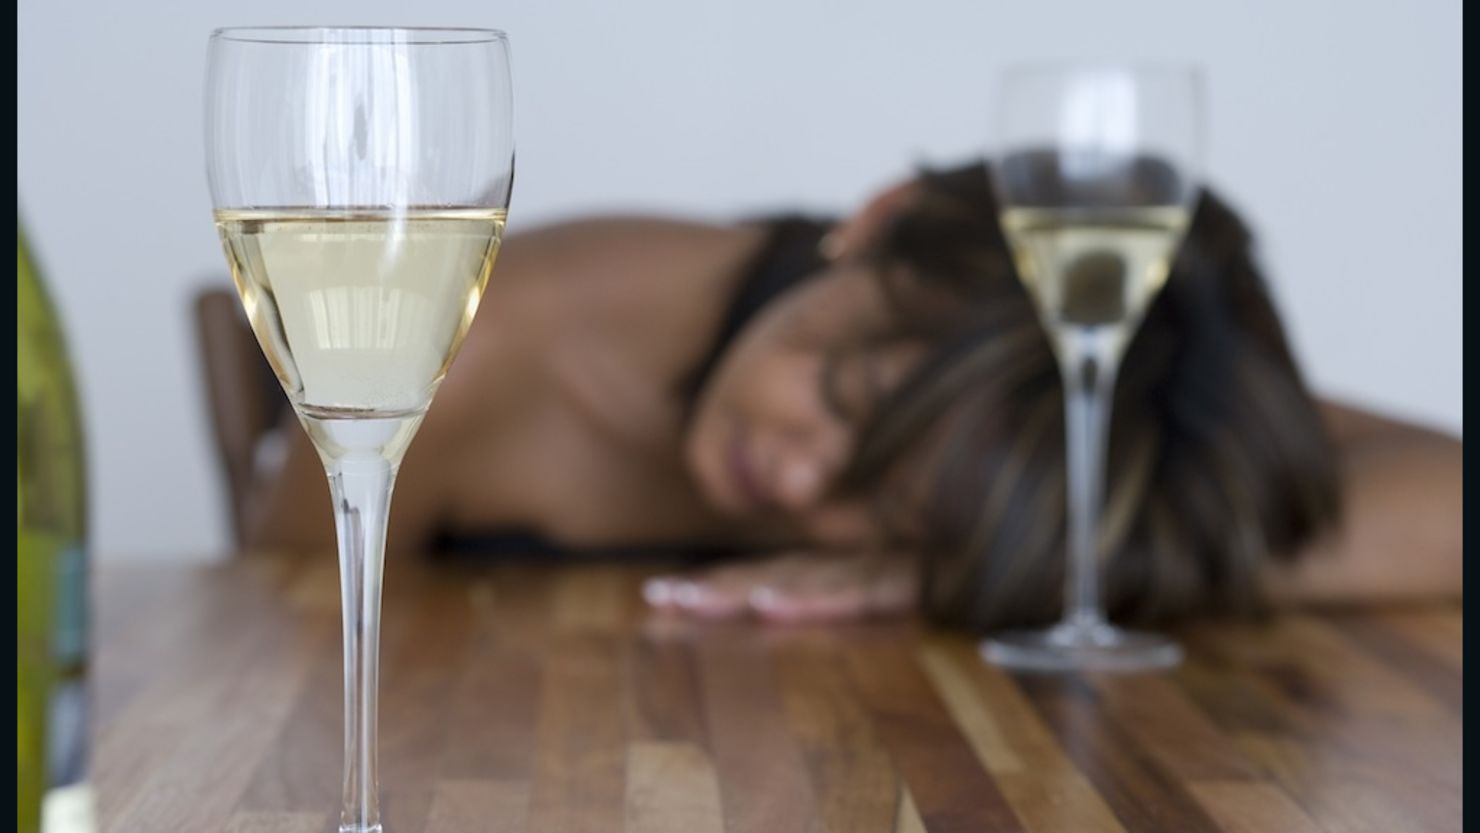 Binge drinking among women is a "serious, under-recognized problem," according to the CDC.